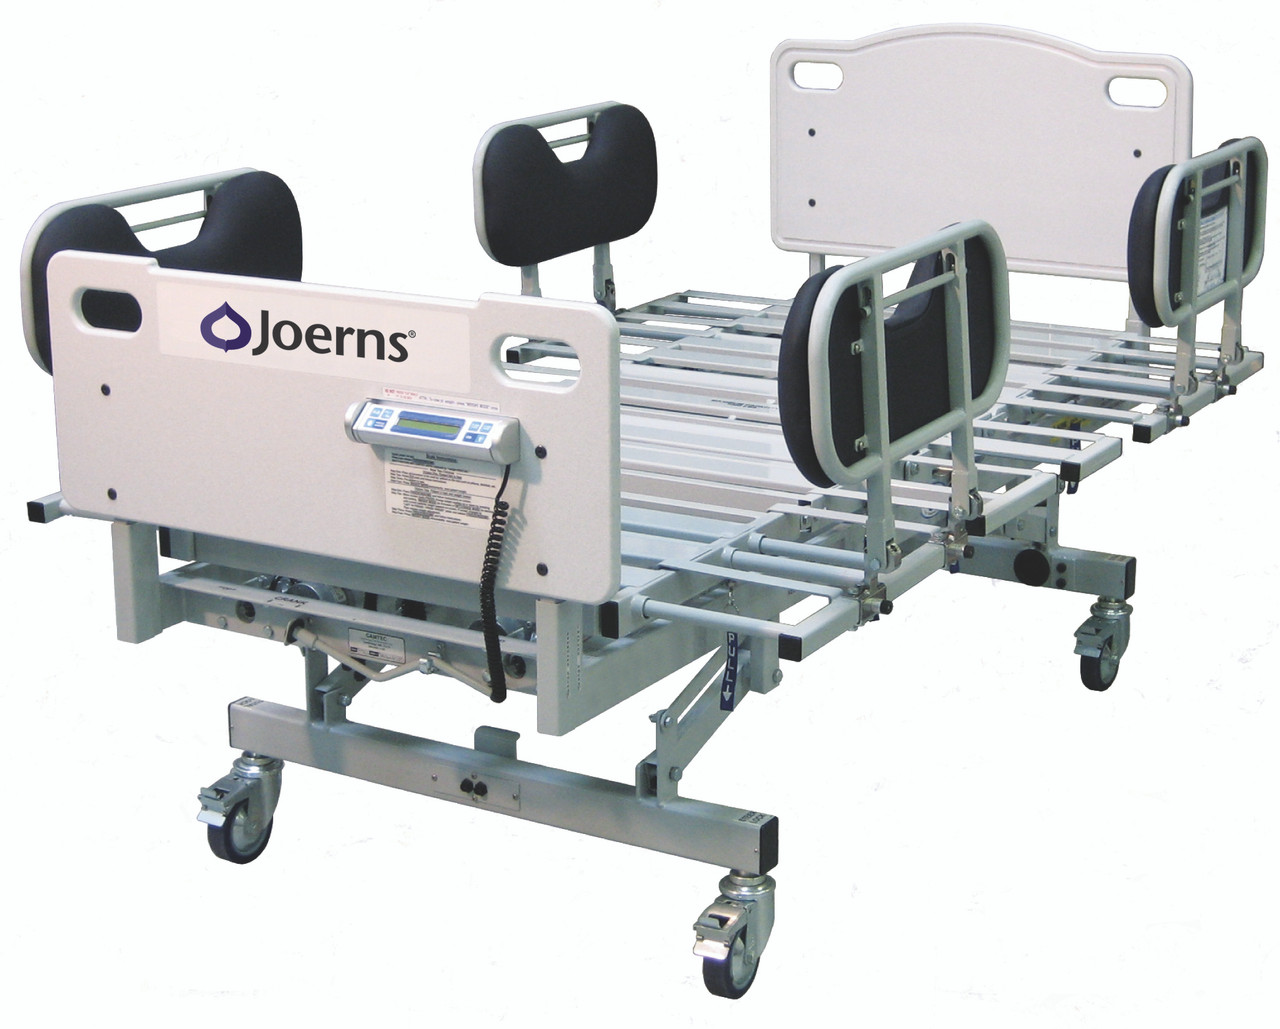 Hospital Bed Joerns RC 1000 Bariatric Expandable Frame, 1000lbs. Capacity,  Many Features Included, 84" L, 39‐54" W, Split Frame, 17‐30" Height Range,  5 Function Control, Integrated Scale is Extra. - Compression Medical  Distributors, Inc.